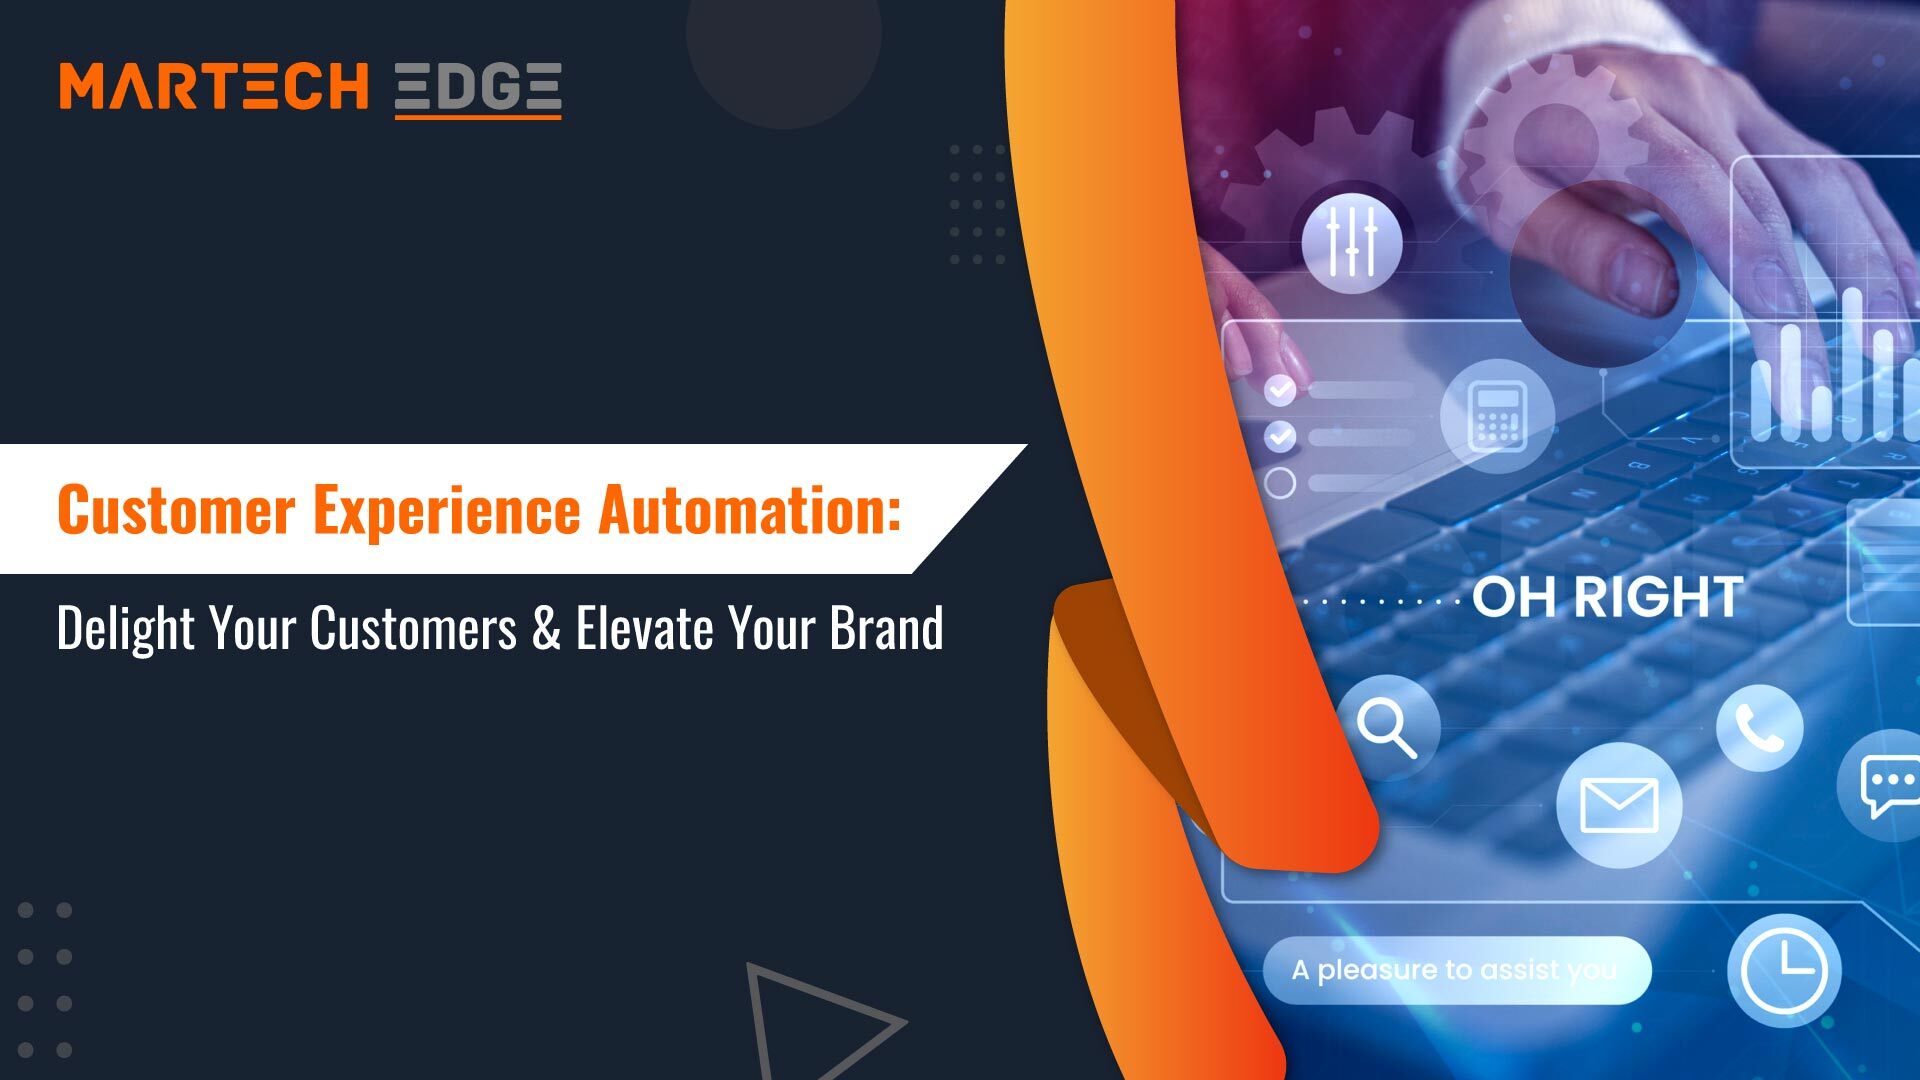 Customer Experience Automation: Delight Your Customers & Elevate Your Brand